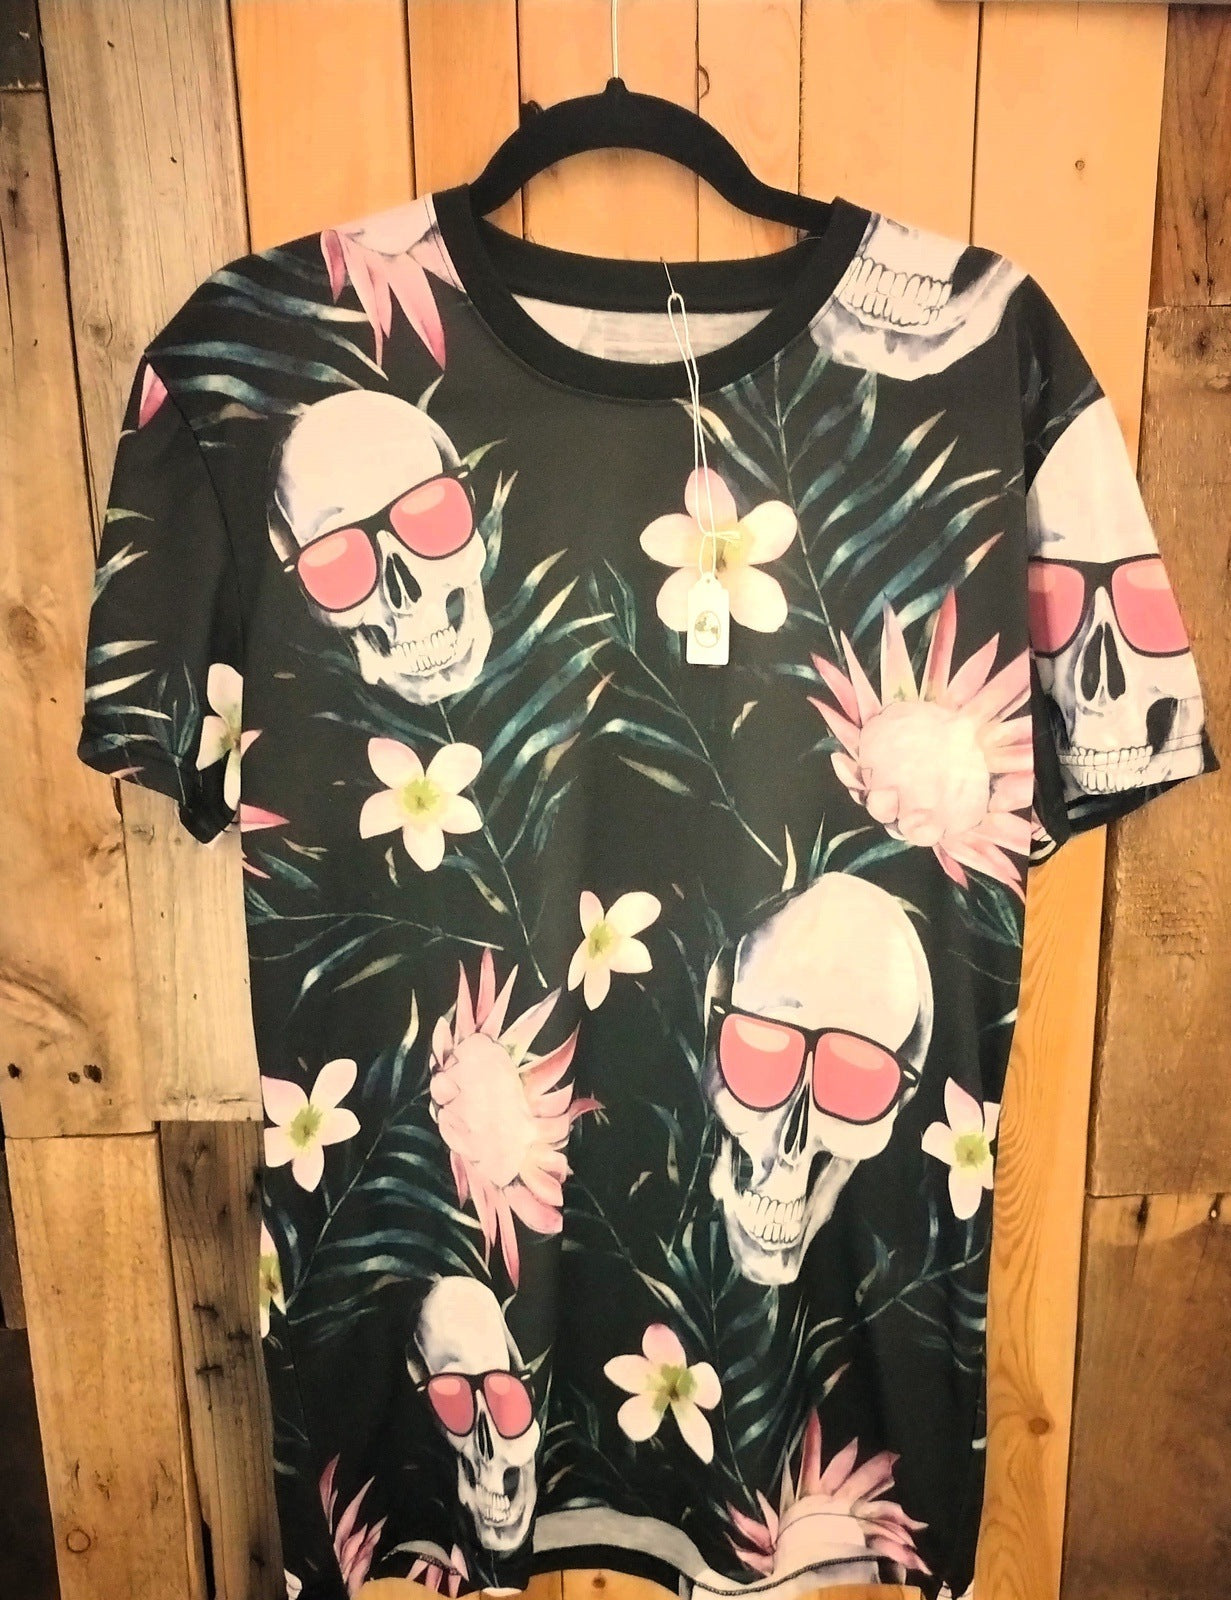 Rue 21 Skulls and Flowers T Shirt Size Medium New with Tags